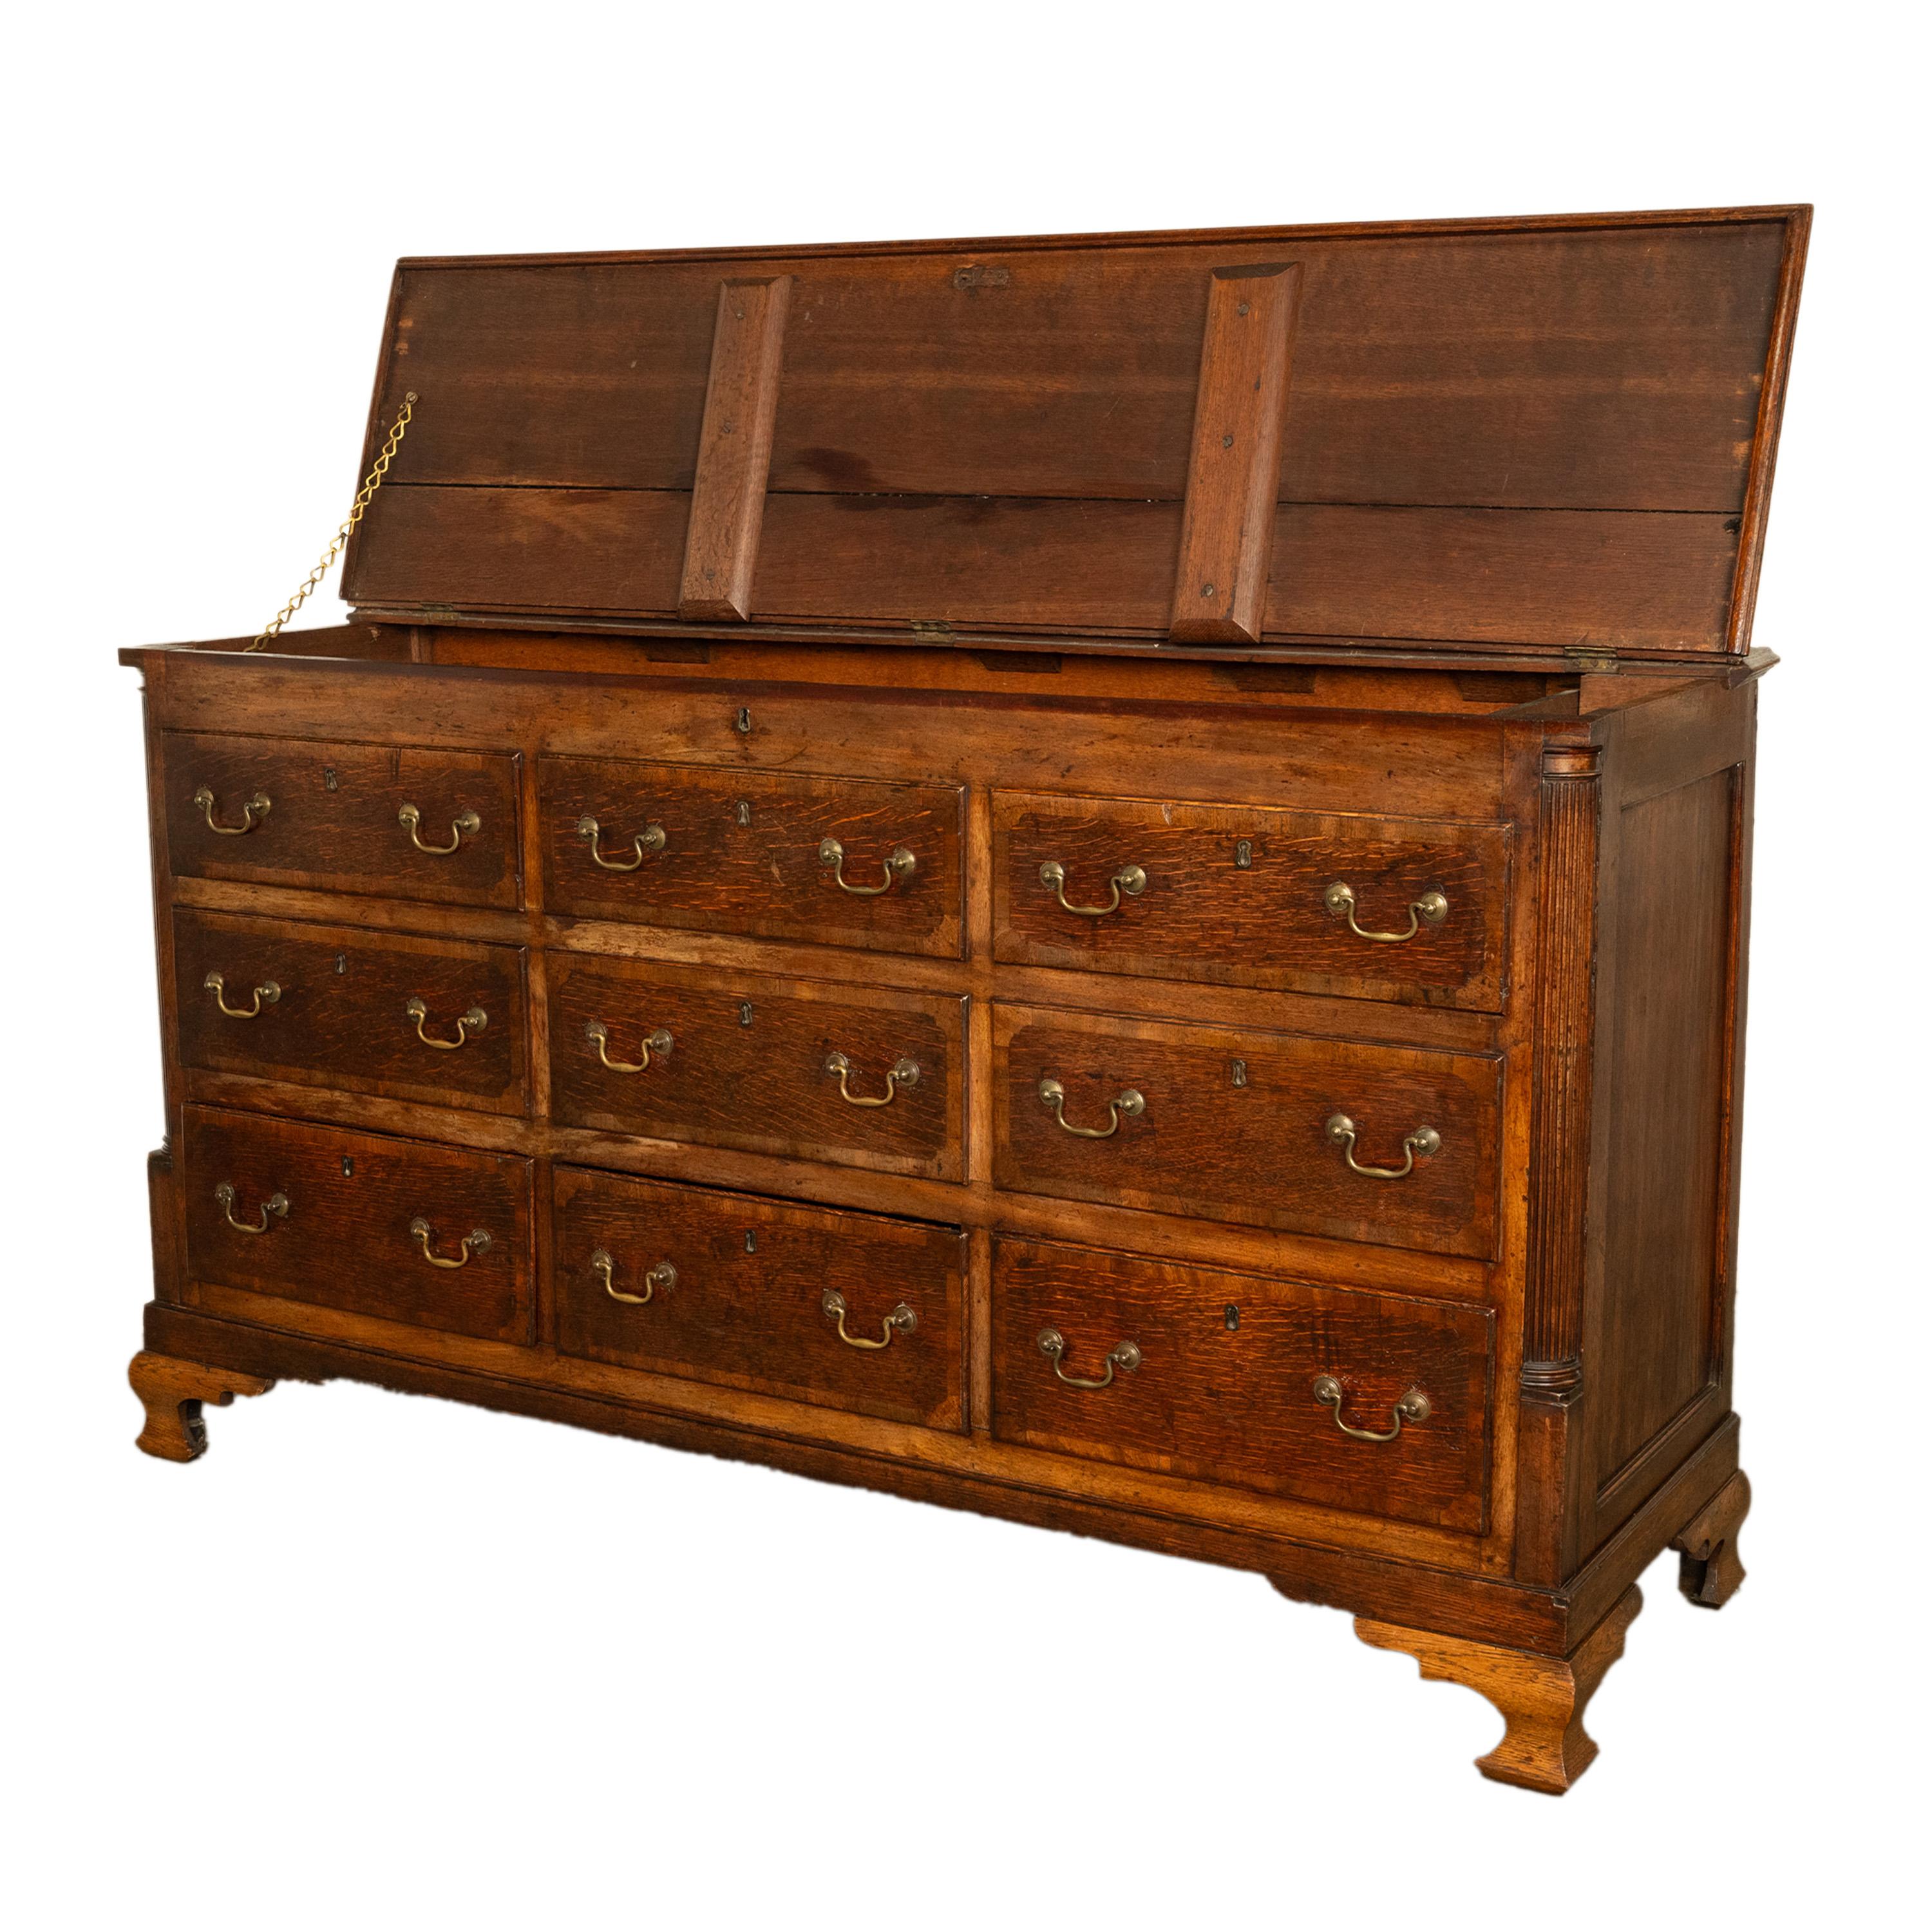 Antique 18th C Georgian Oak Mahogany Hinged Top Mule Chest Coffer Sideboard 1770 In Good Condition For Sale In Portland, OR